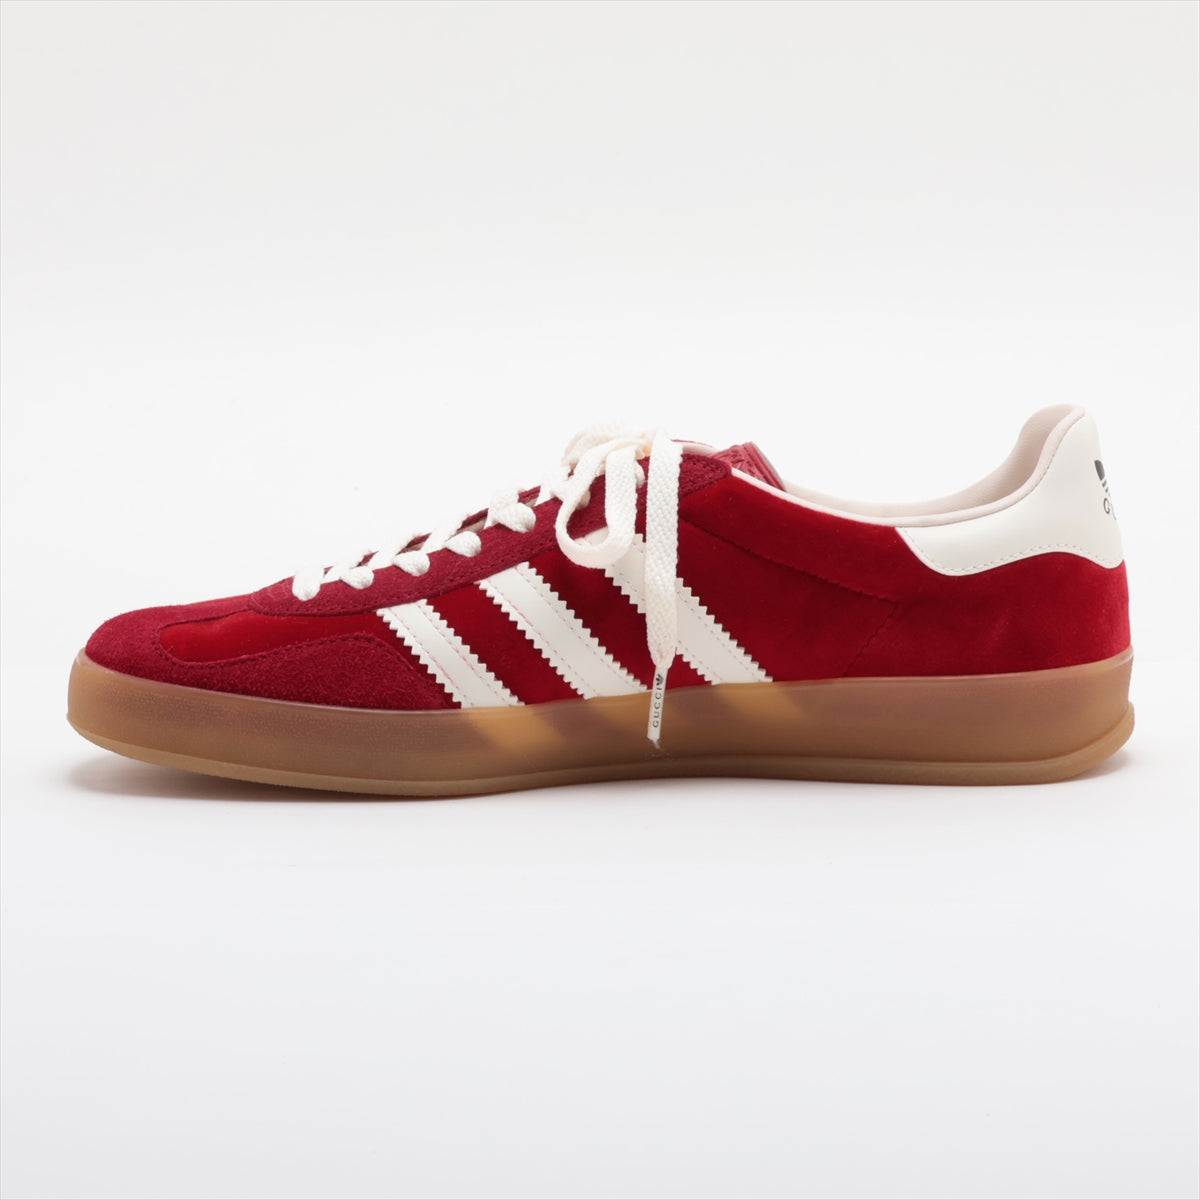 Gucci x adidas Gazelle Velour & leather Sneakers 25.5cm Ladies' Red x white 707848 HQ8853 Replacement string box There is a bag